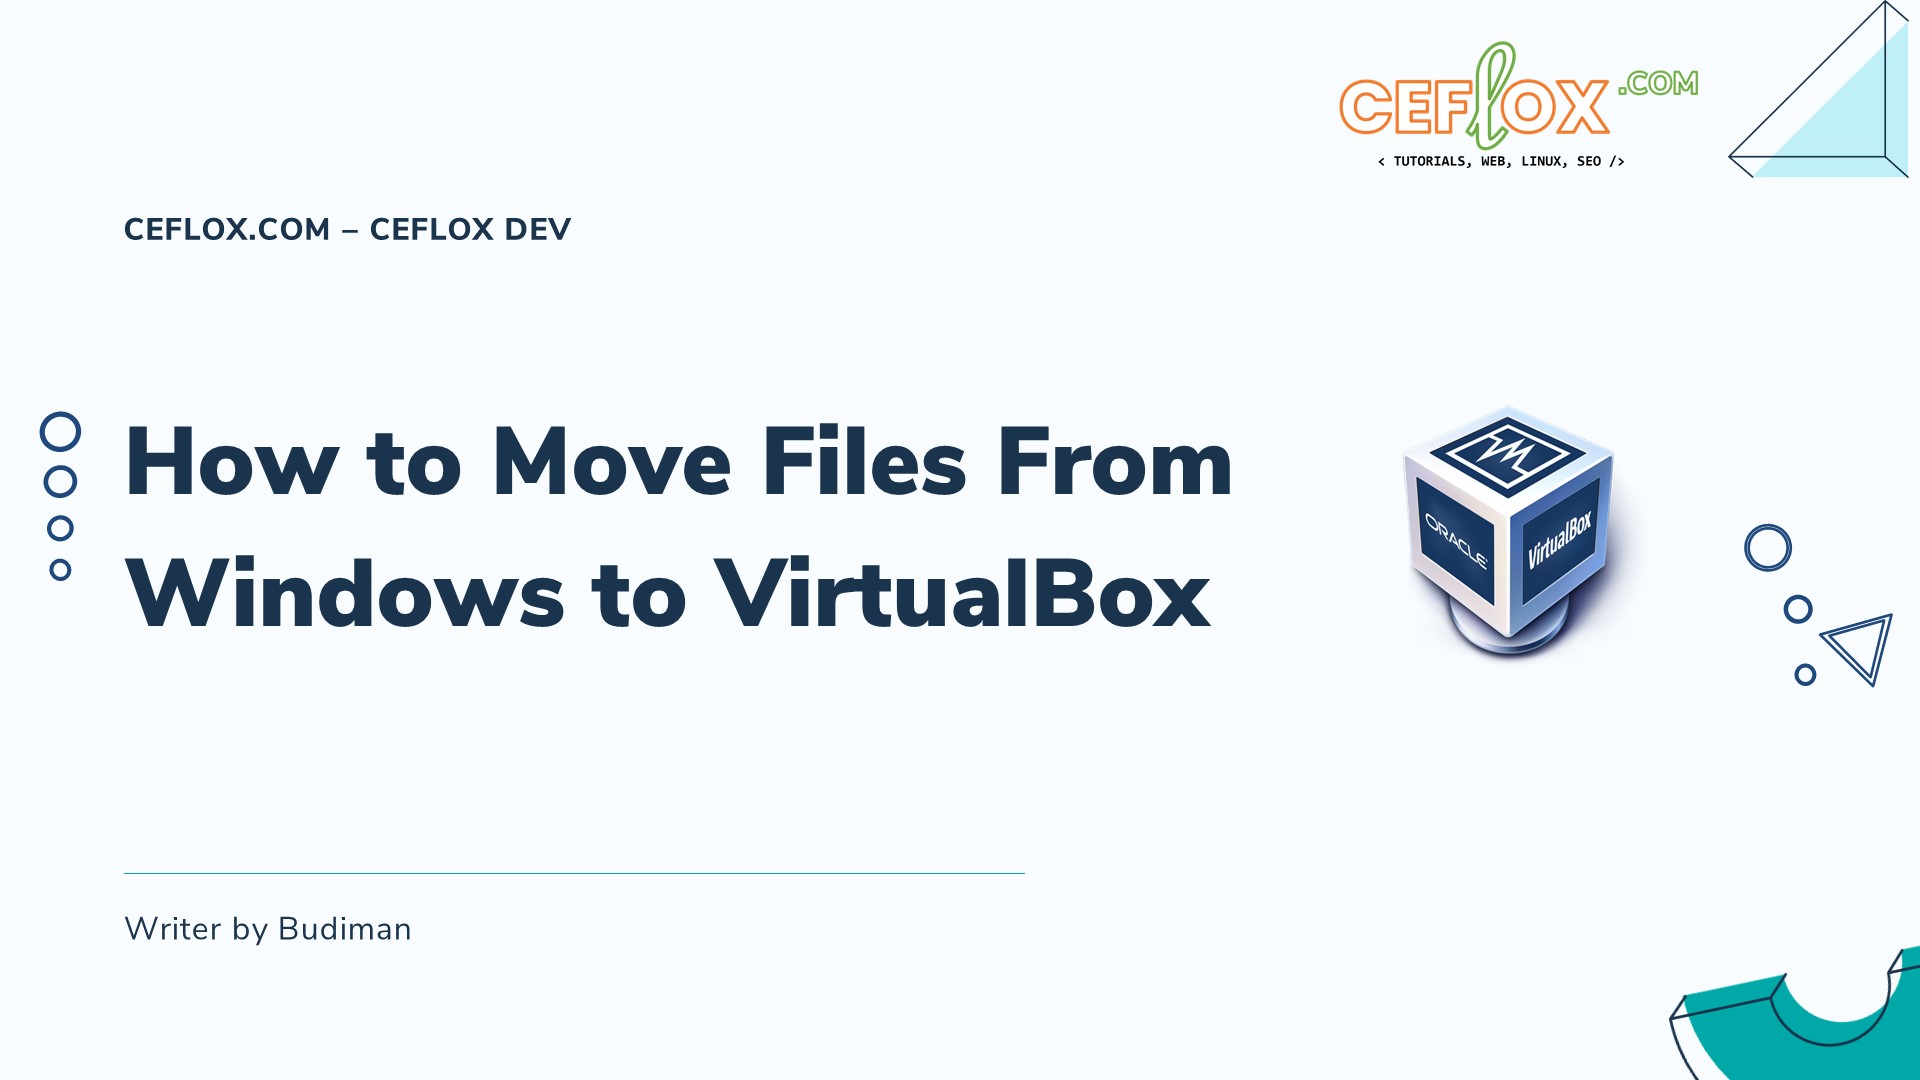 Move Files From Windows to VirtualBox